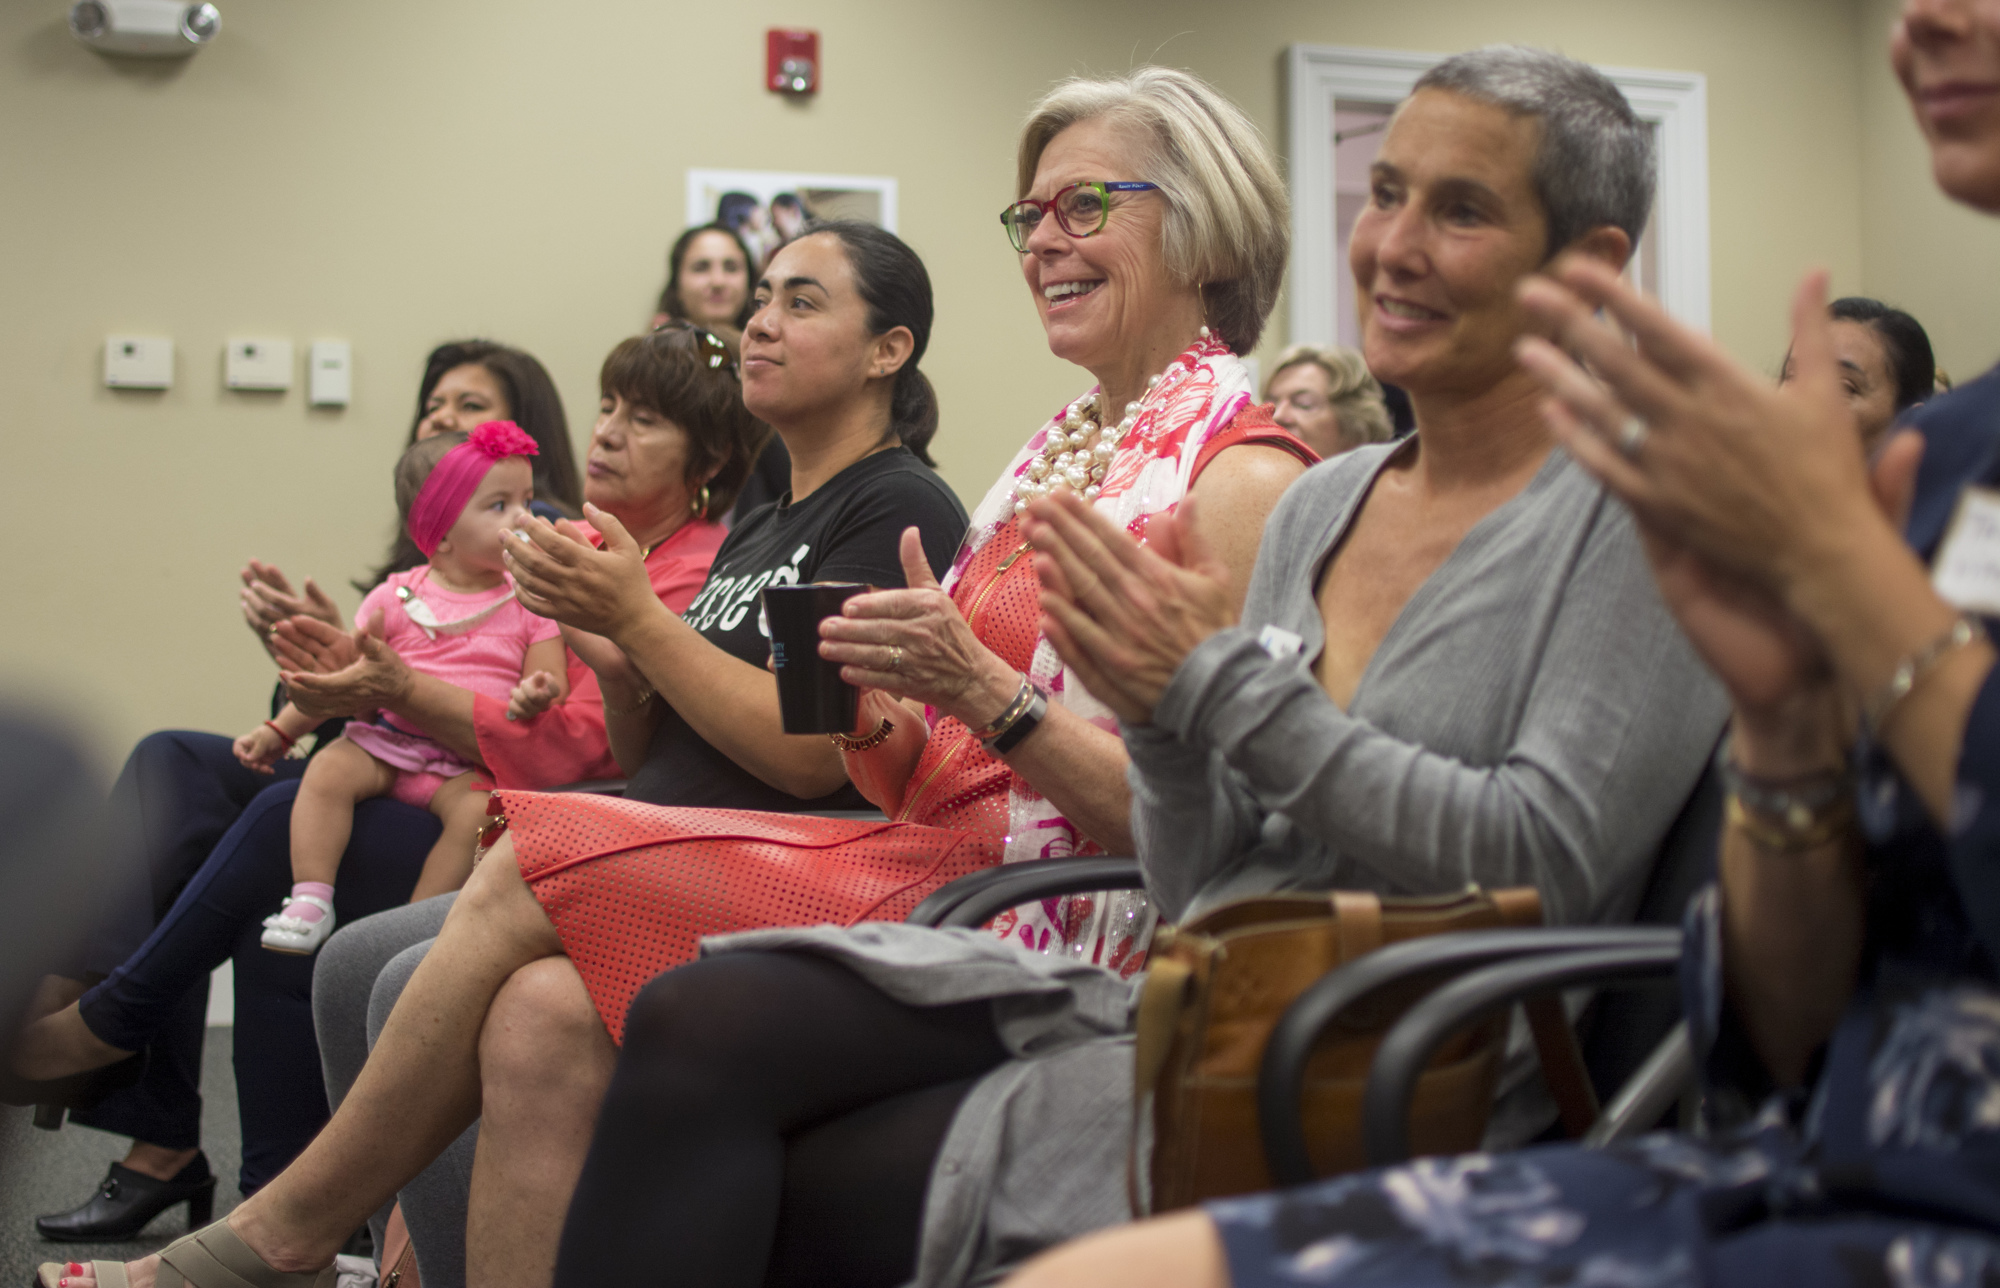 Community Foundation of Sarasota County President and CEO Roxie Jerde applauds after listening to UnidosNow Executive Director Luz Corcuera speak at the Community Foundation of Sarasota County on Dec. 6.